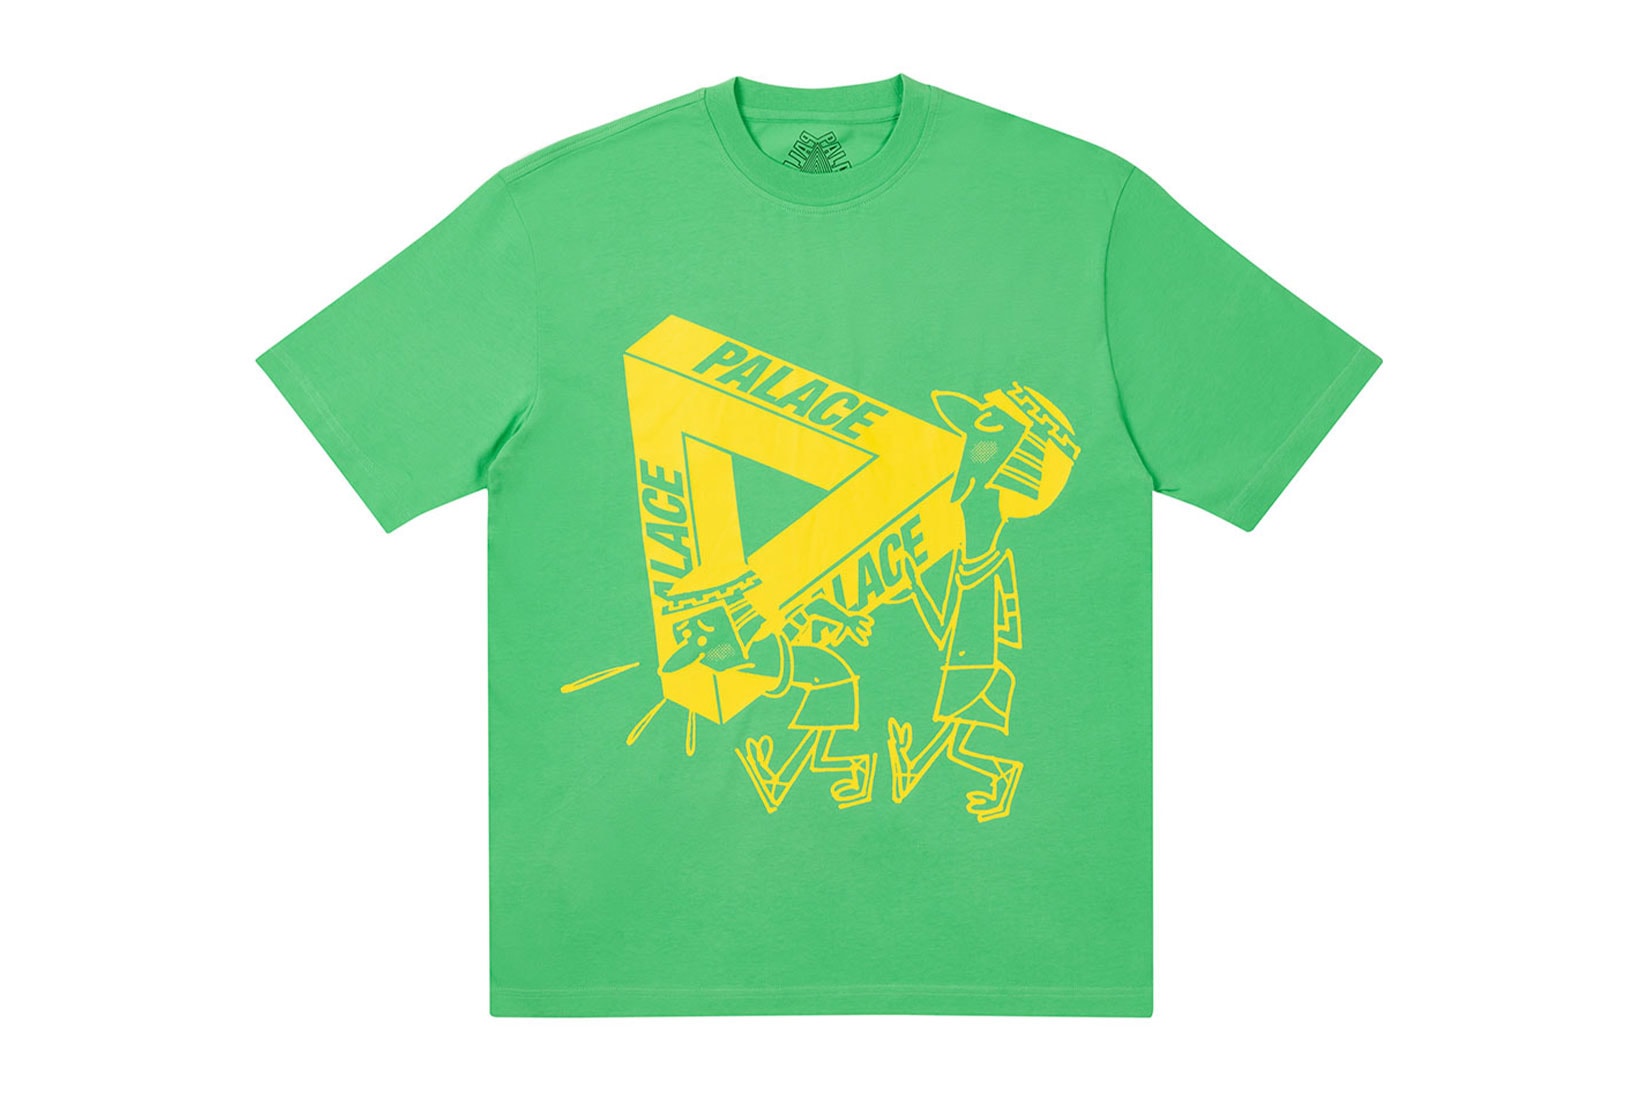 palace spring drop 4 collection graphic tshirt illustrations green yellow